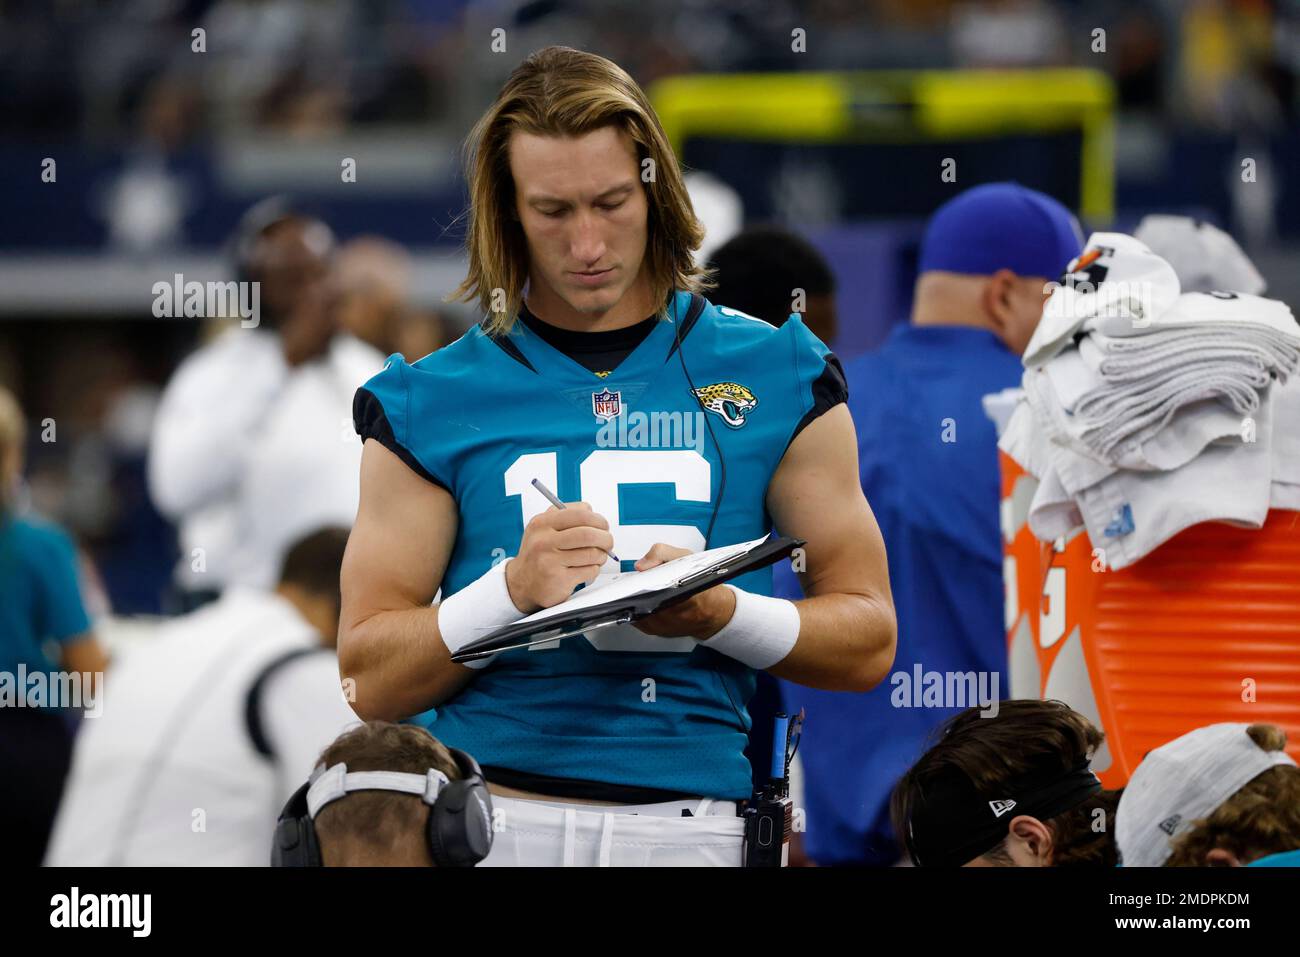 Jacksonville Jaguars quarterback Trevor Lawrence takes notes as he watches  play against the Dallas Cowboys in the second half of a preseason NFL  football game in Arlington, Texas, Sunday, Aug. 29, 2021. (